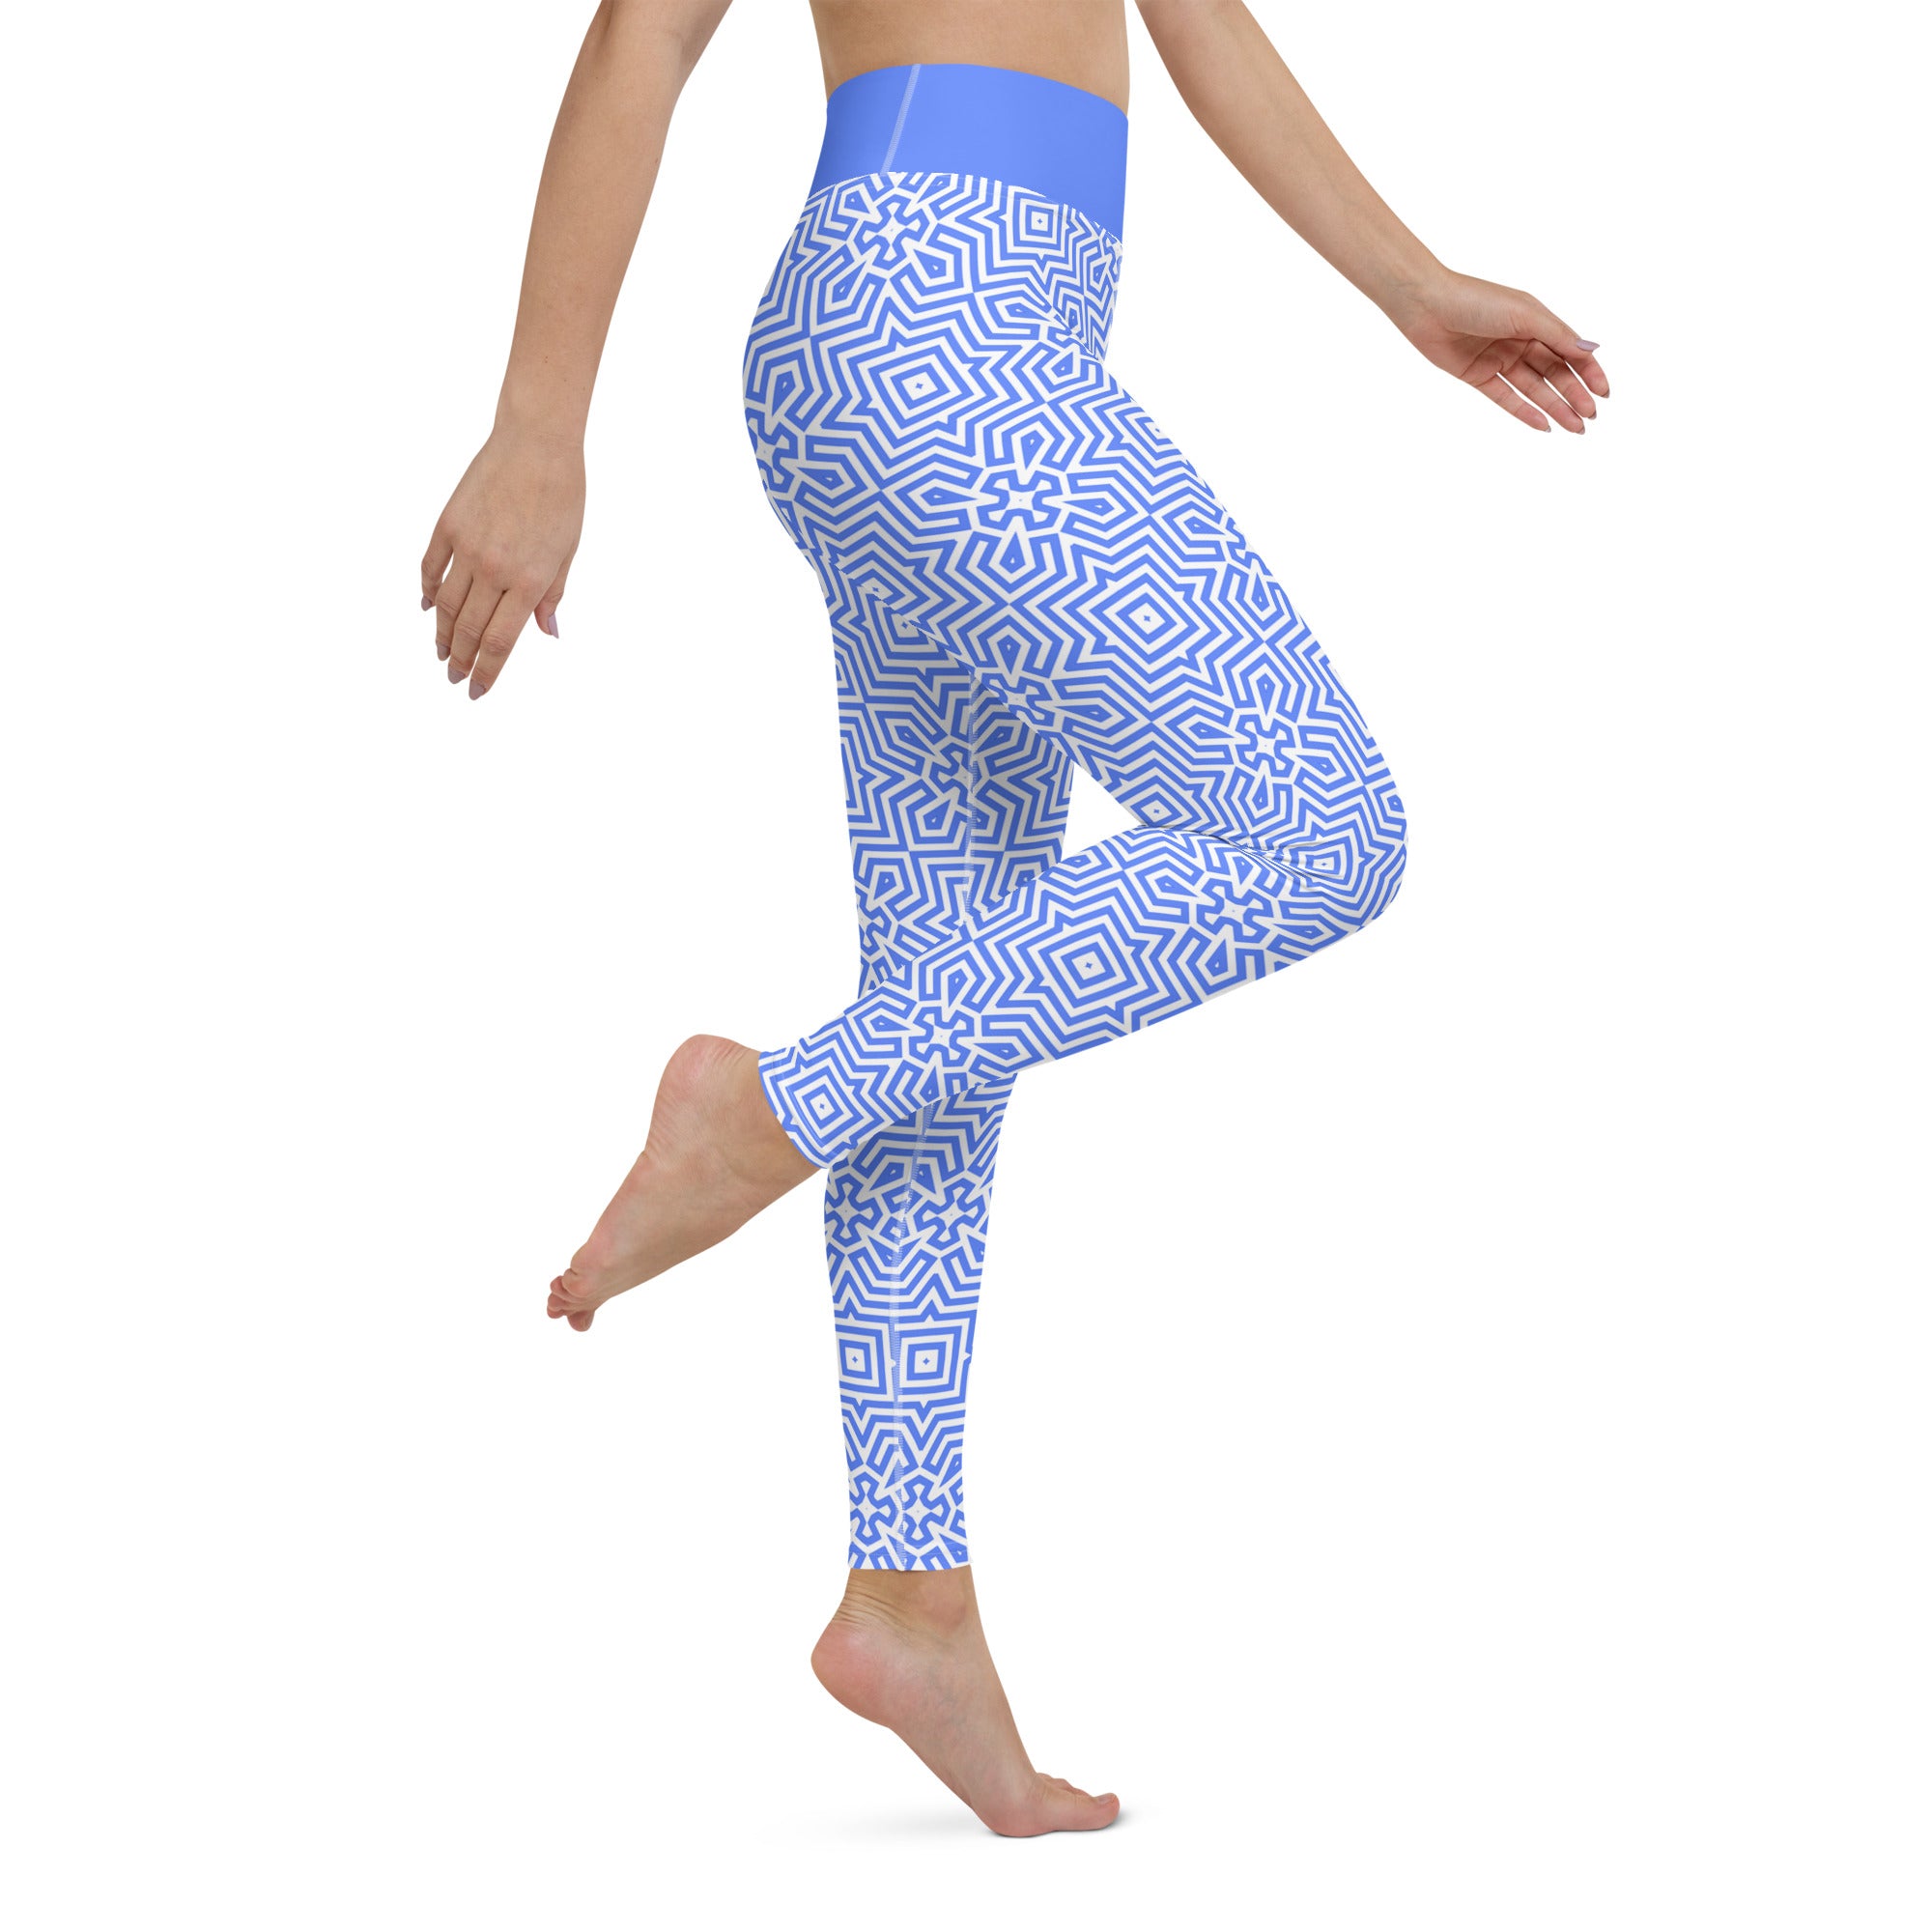 Radiant Reflection Yoga Leggings paired with a stylish top for a casual, sporty look.